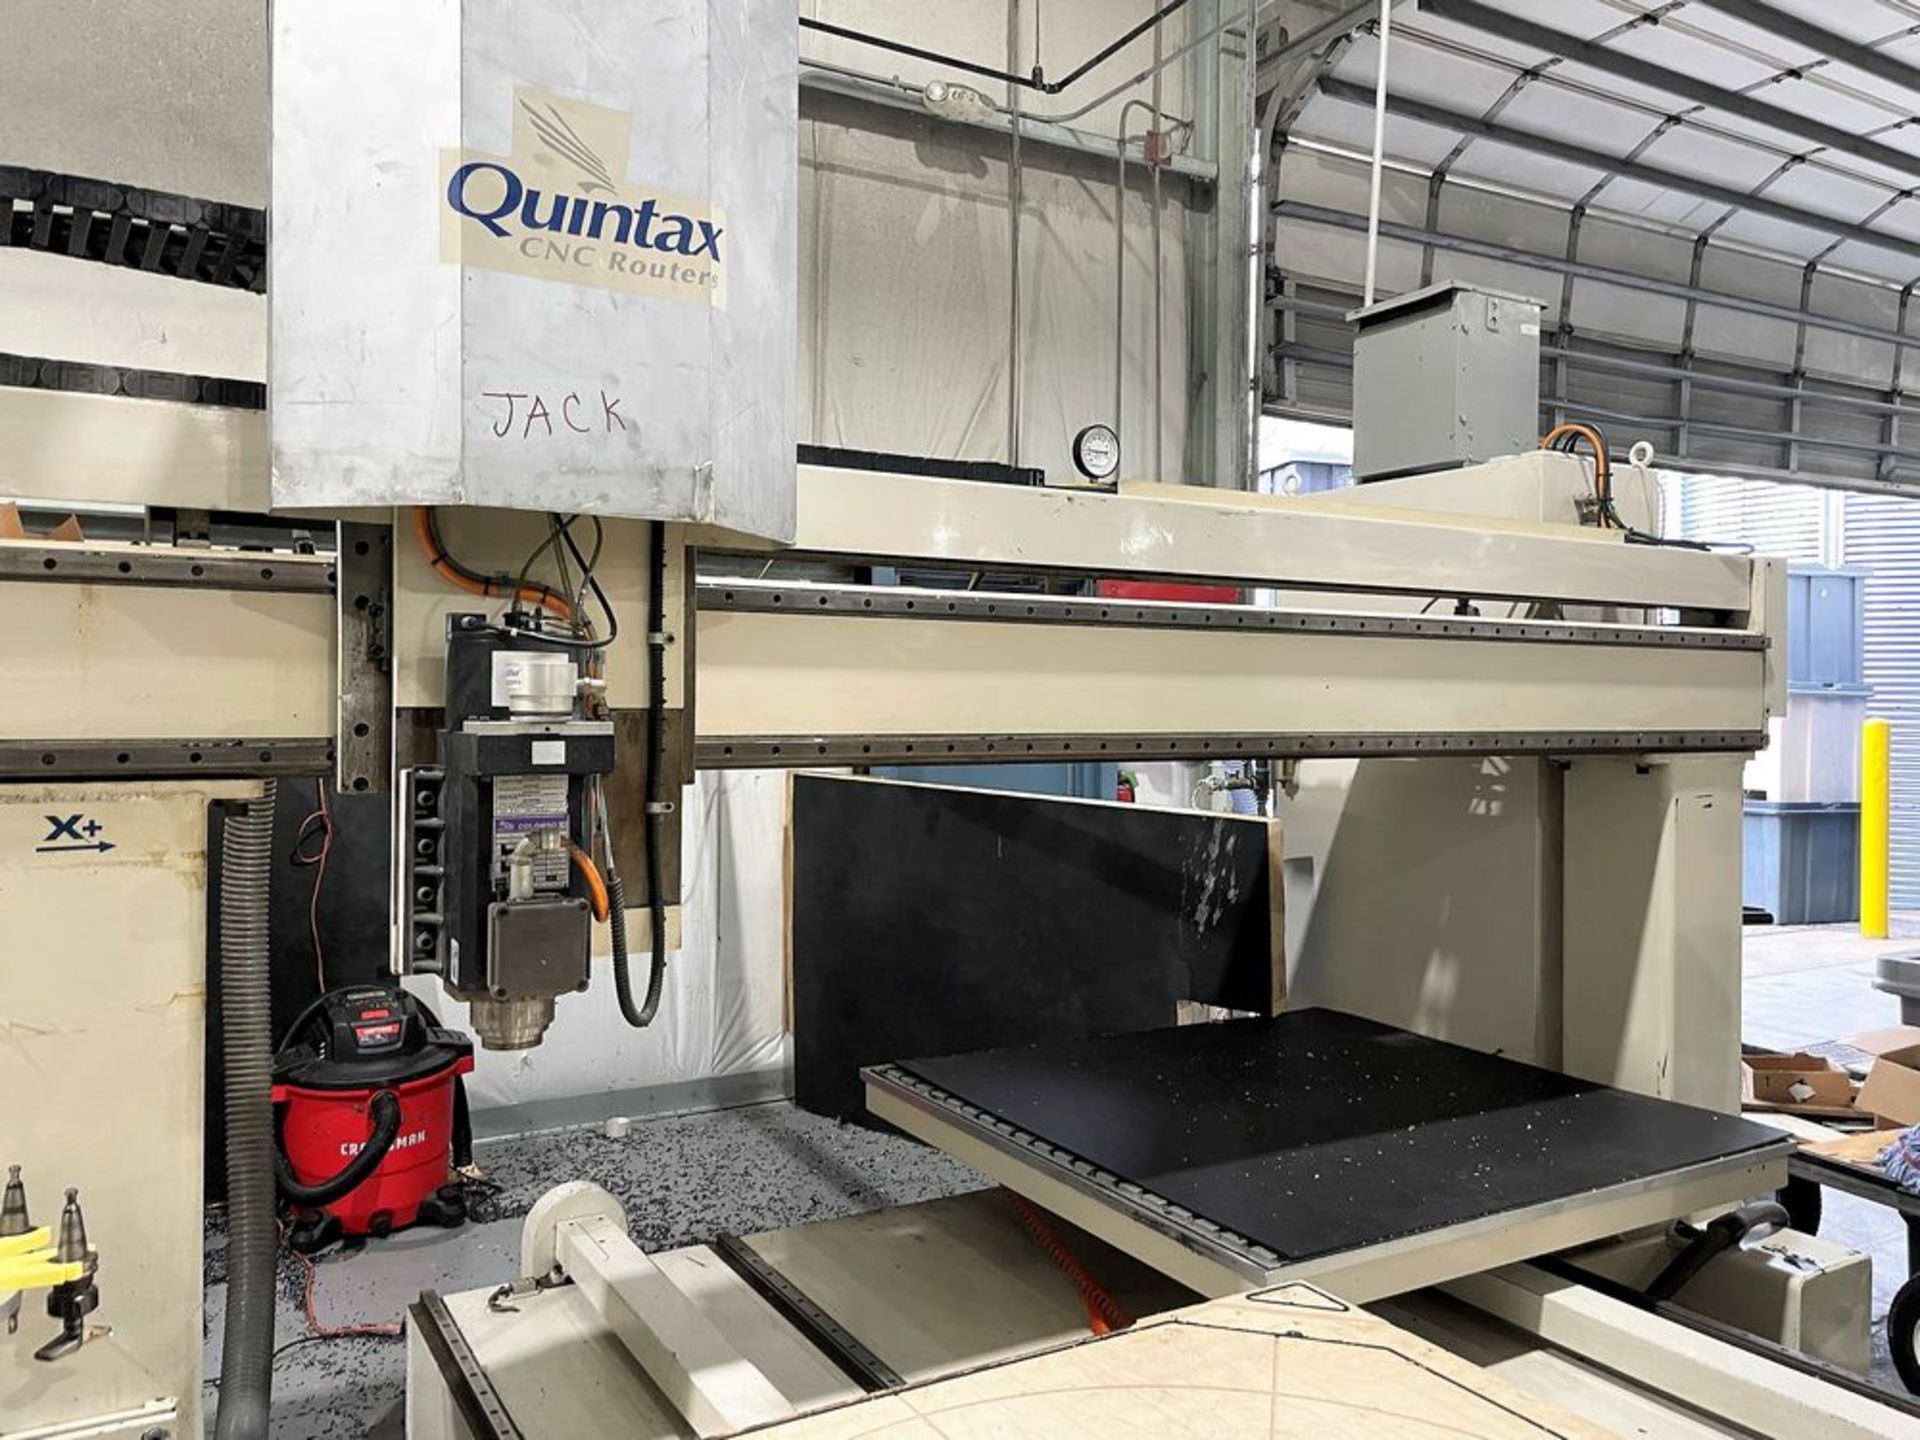 QUINTAX Q3M 3-AXIS DUAL 5X5 TABLES CNC ROUTER, S/N 0-1123, NEW 2009 - Image 6 of 11